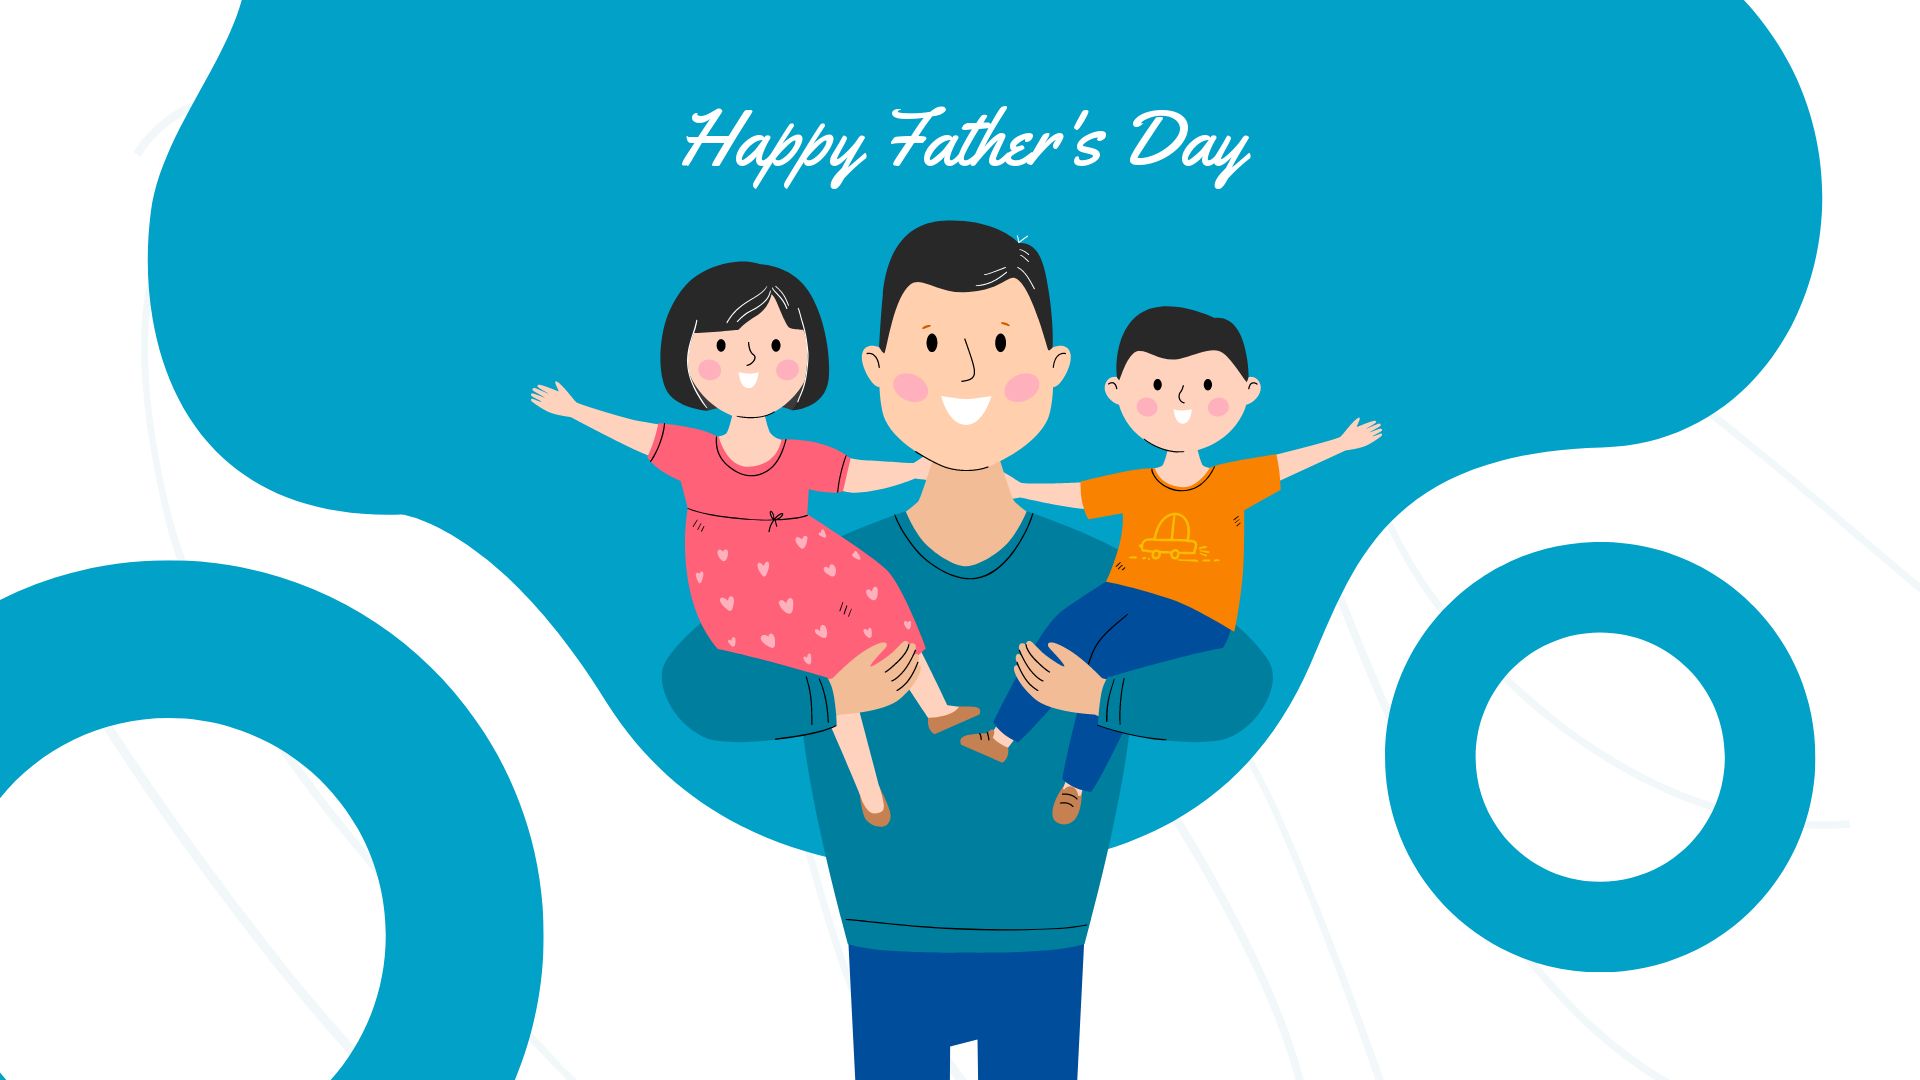 Animated Happy Father's Day Image - After Effects, EPS, GIF, Illustrator,  JPG, PNG, SVG 